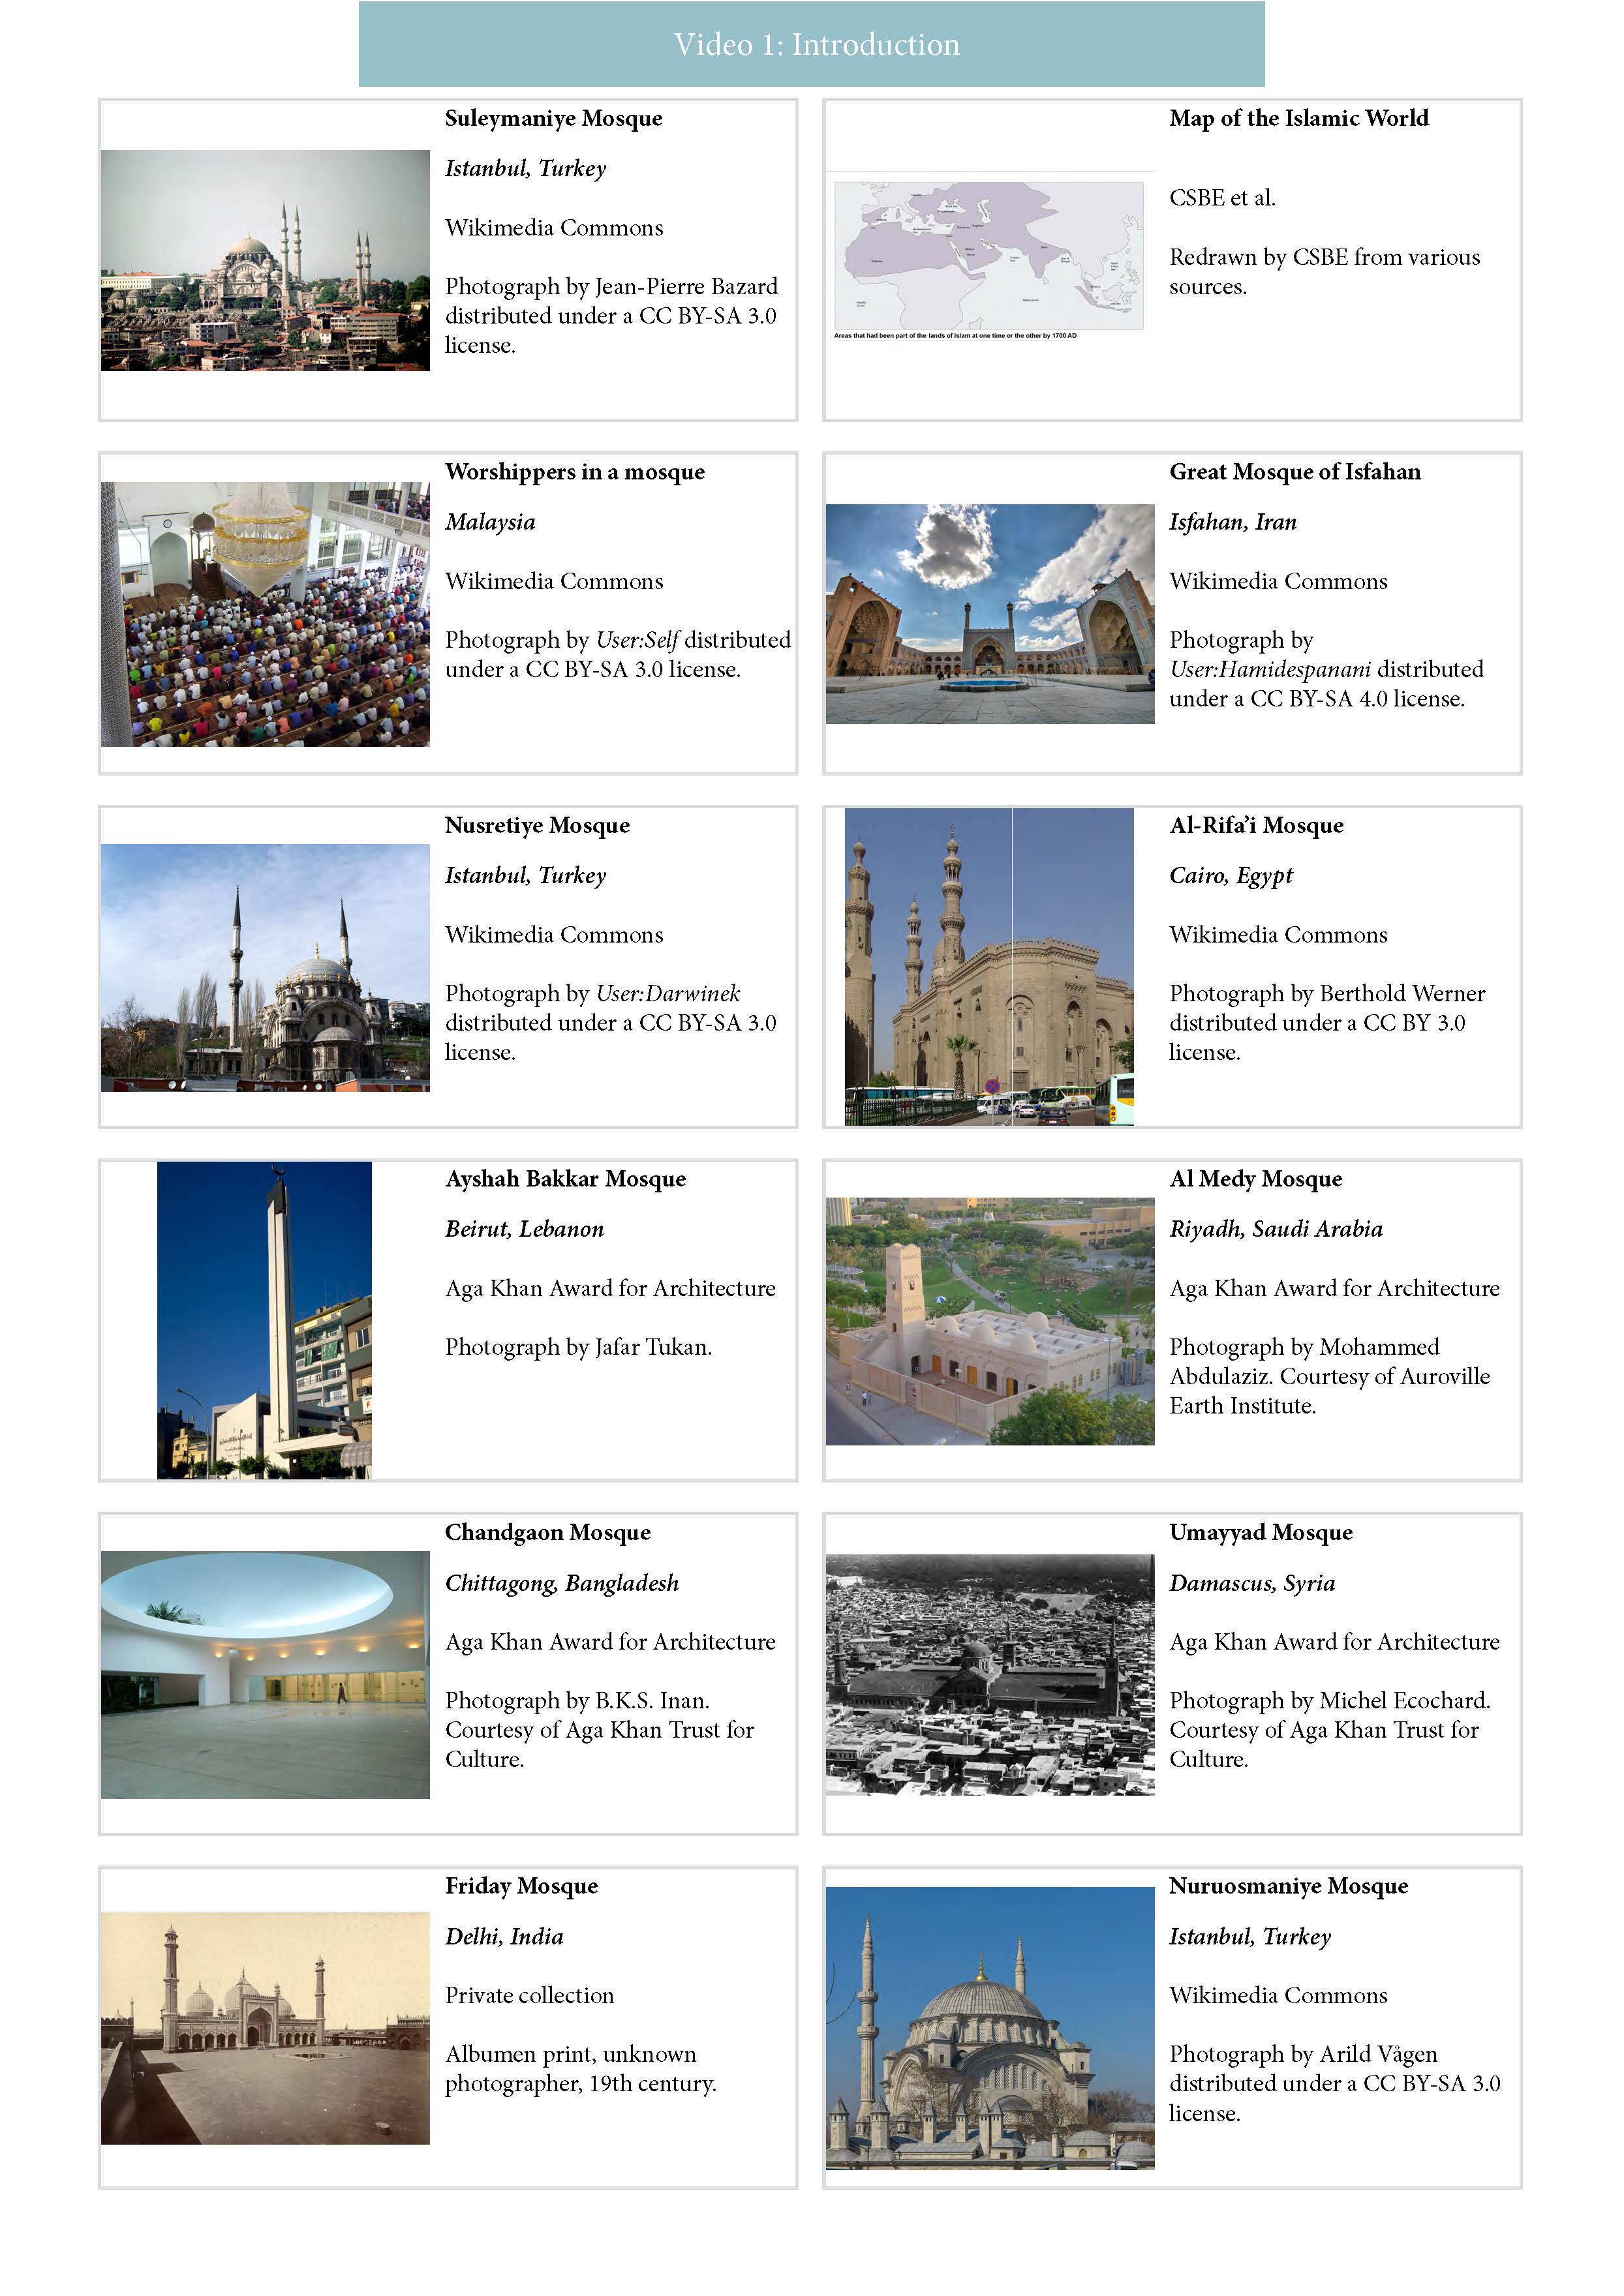 Image Credits Catalogue. The Architecture of the Mosque: Historical Roots and Modern Influences